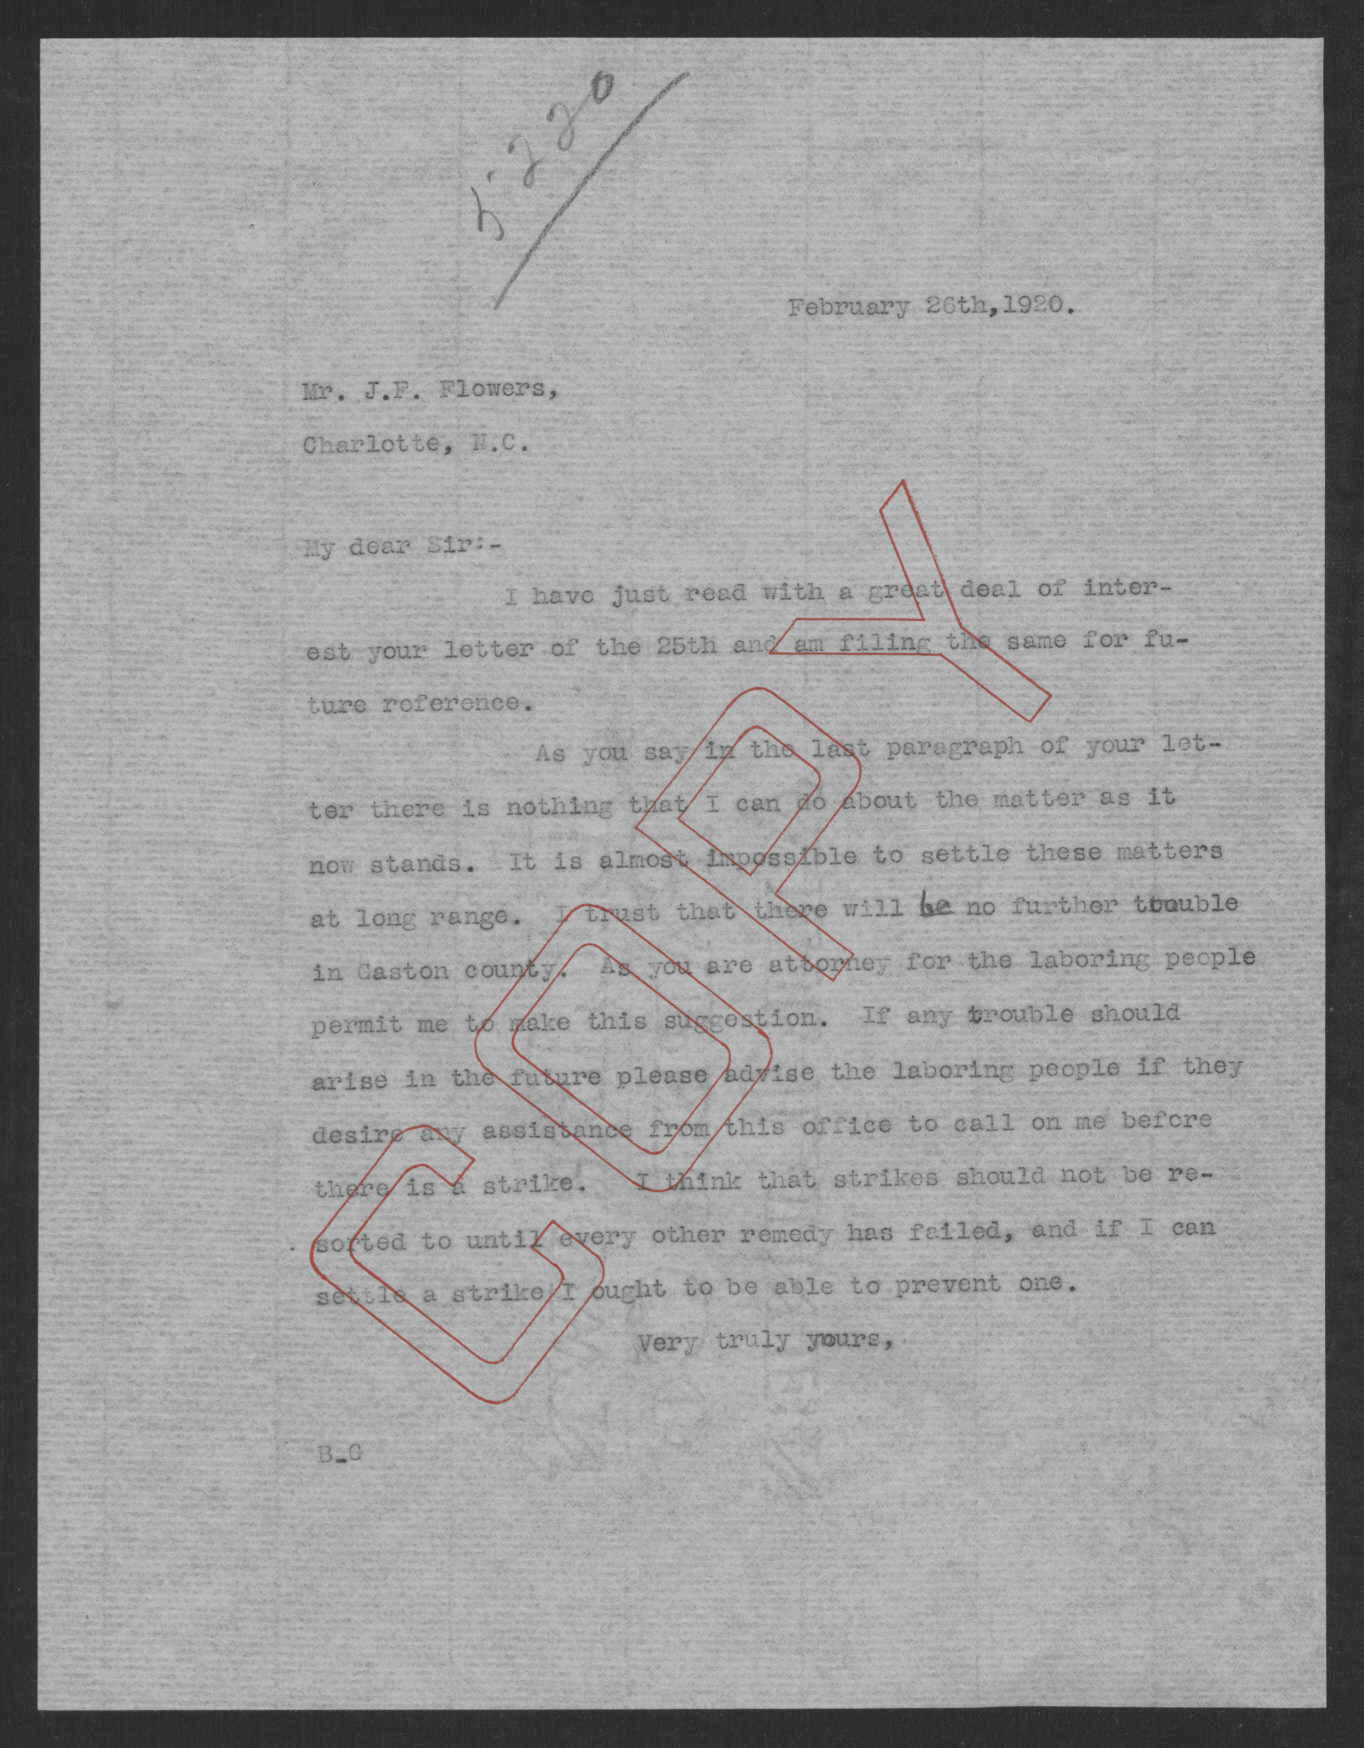 Letter from Thomas W. Bickett to John F. Flowers, February 26, 1920